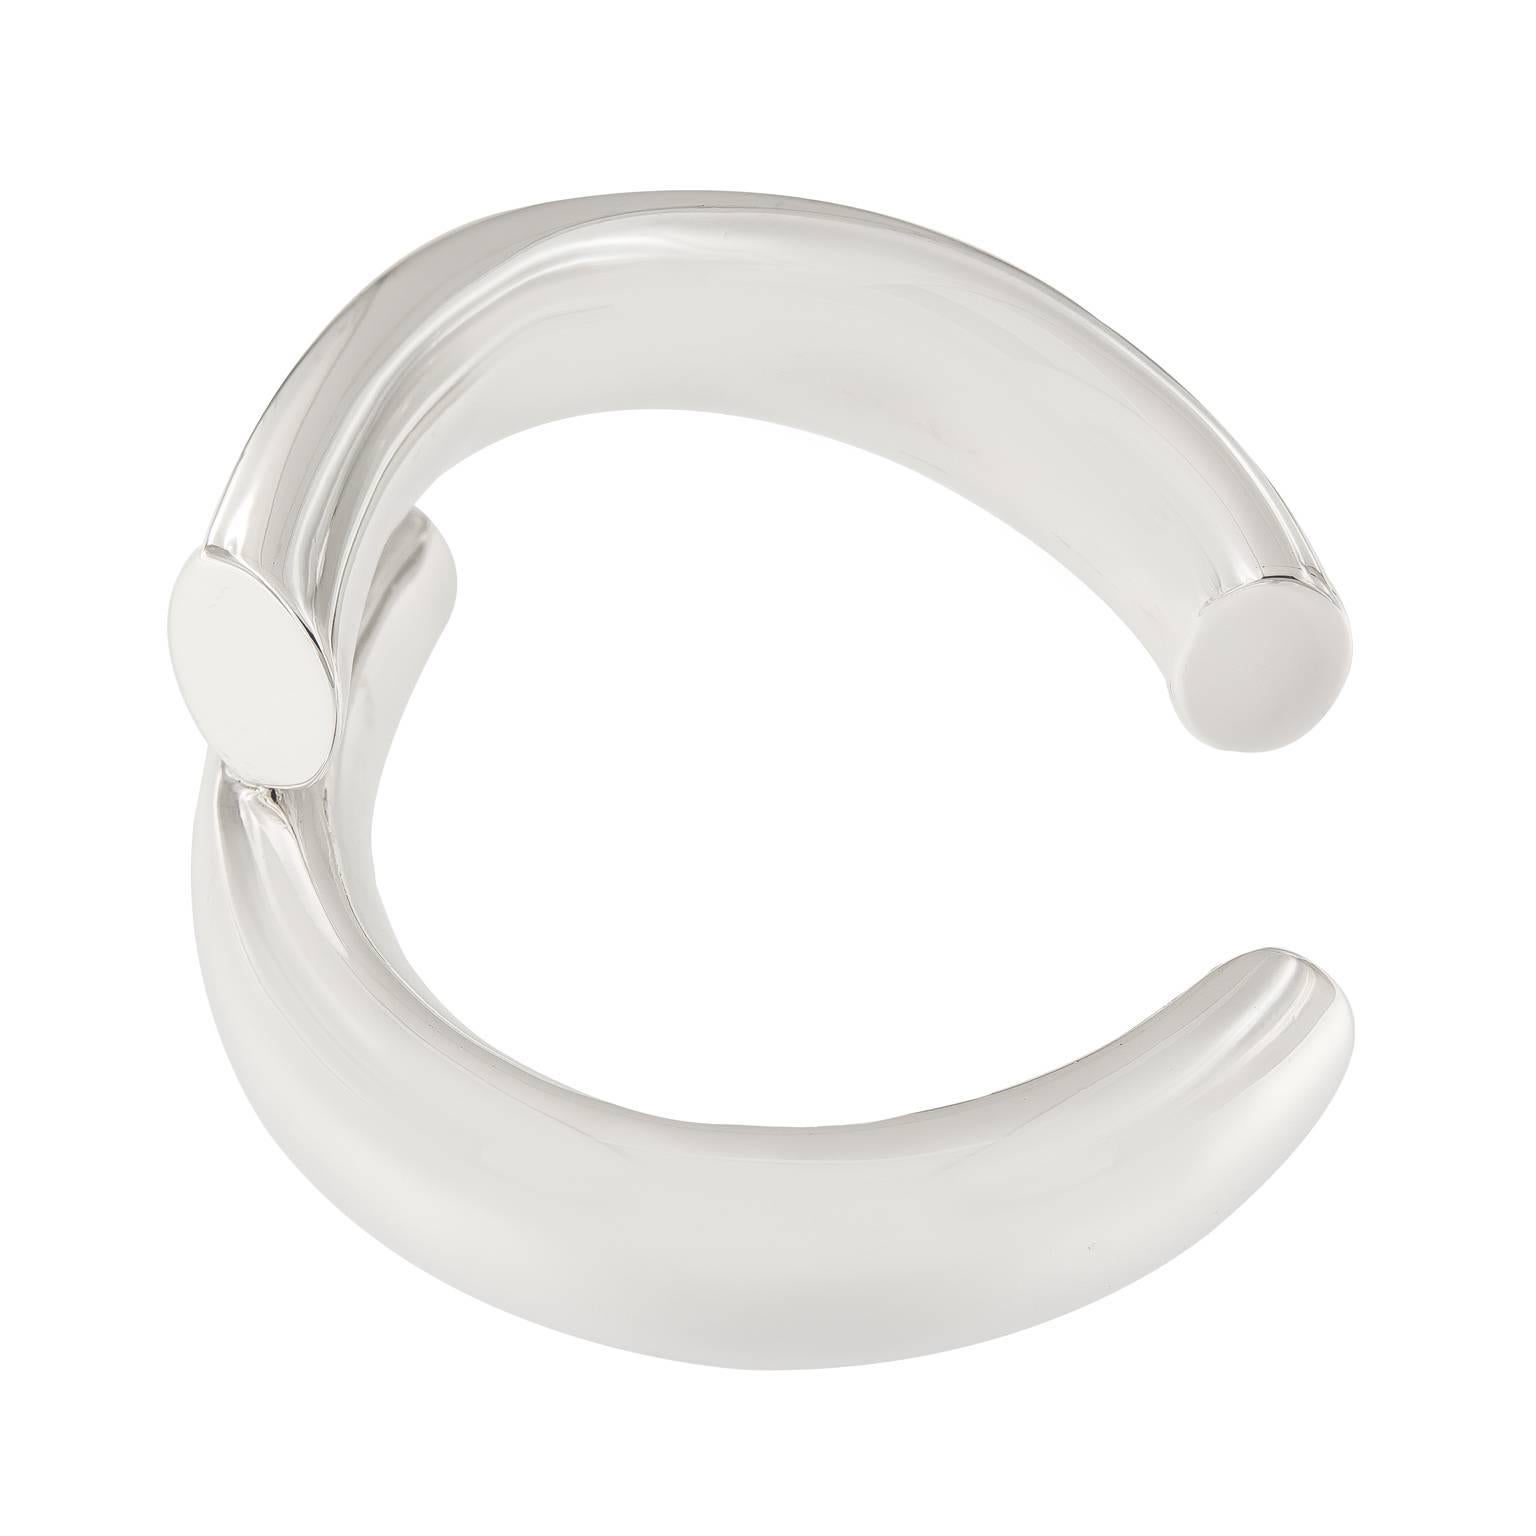 The bold shape of this sleek tubular cuff is the perfect finishing touch to any look. Weighs 37.6 grams.

MarkedThe bold shape of this sleek tubular cuff is the perfect finishing touch to any look. Weighs 37.6 grams.

Marked Tiffany & Co.